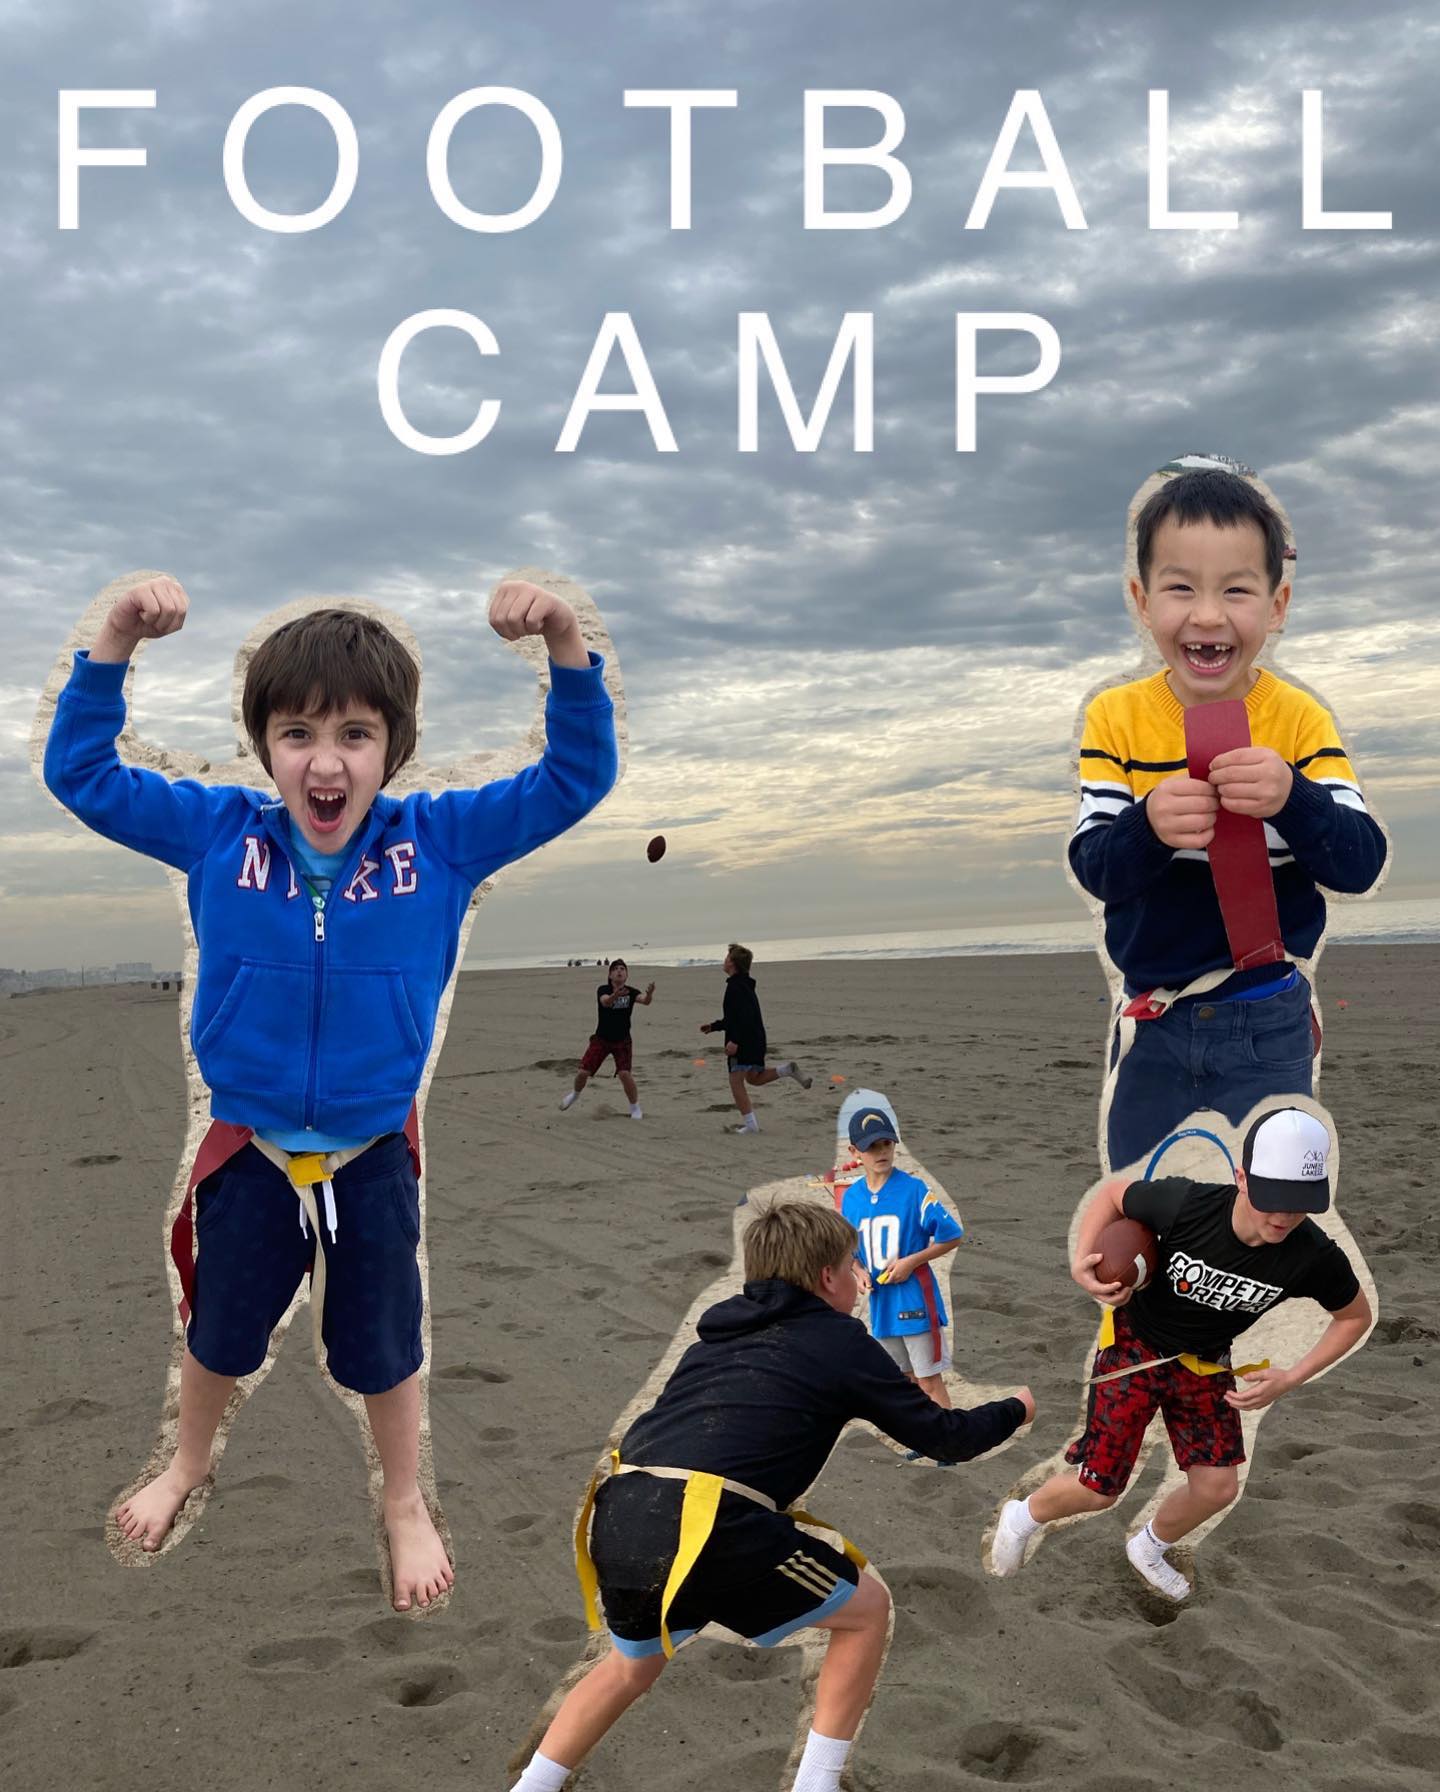 Football Camp is CRUSHING it over at our Will Rogers State Beach location!